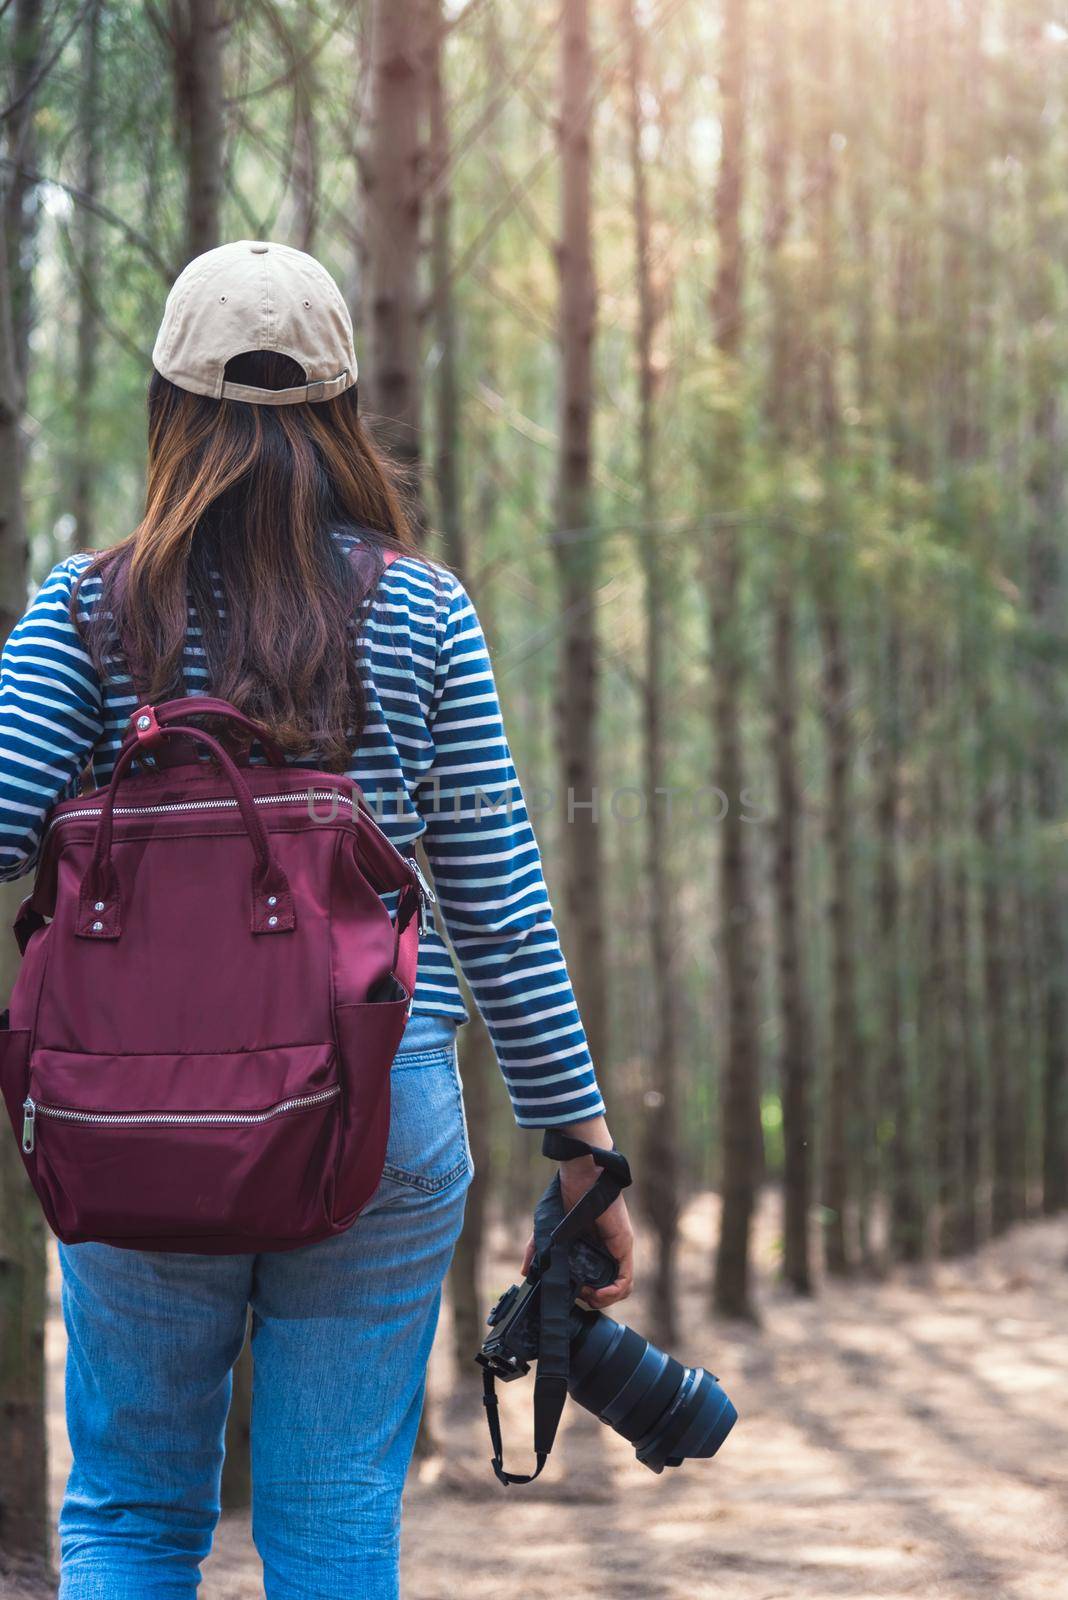 Young female lifestyle photographer travel in forest nature with backpack abd copy space.